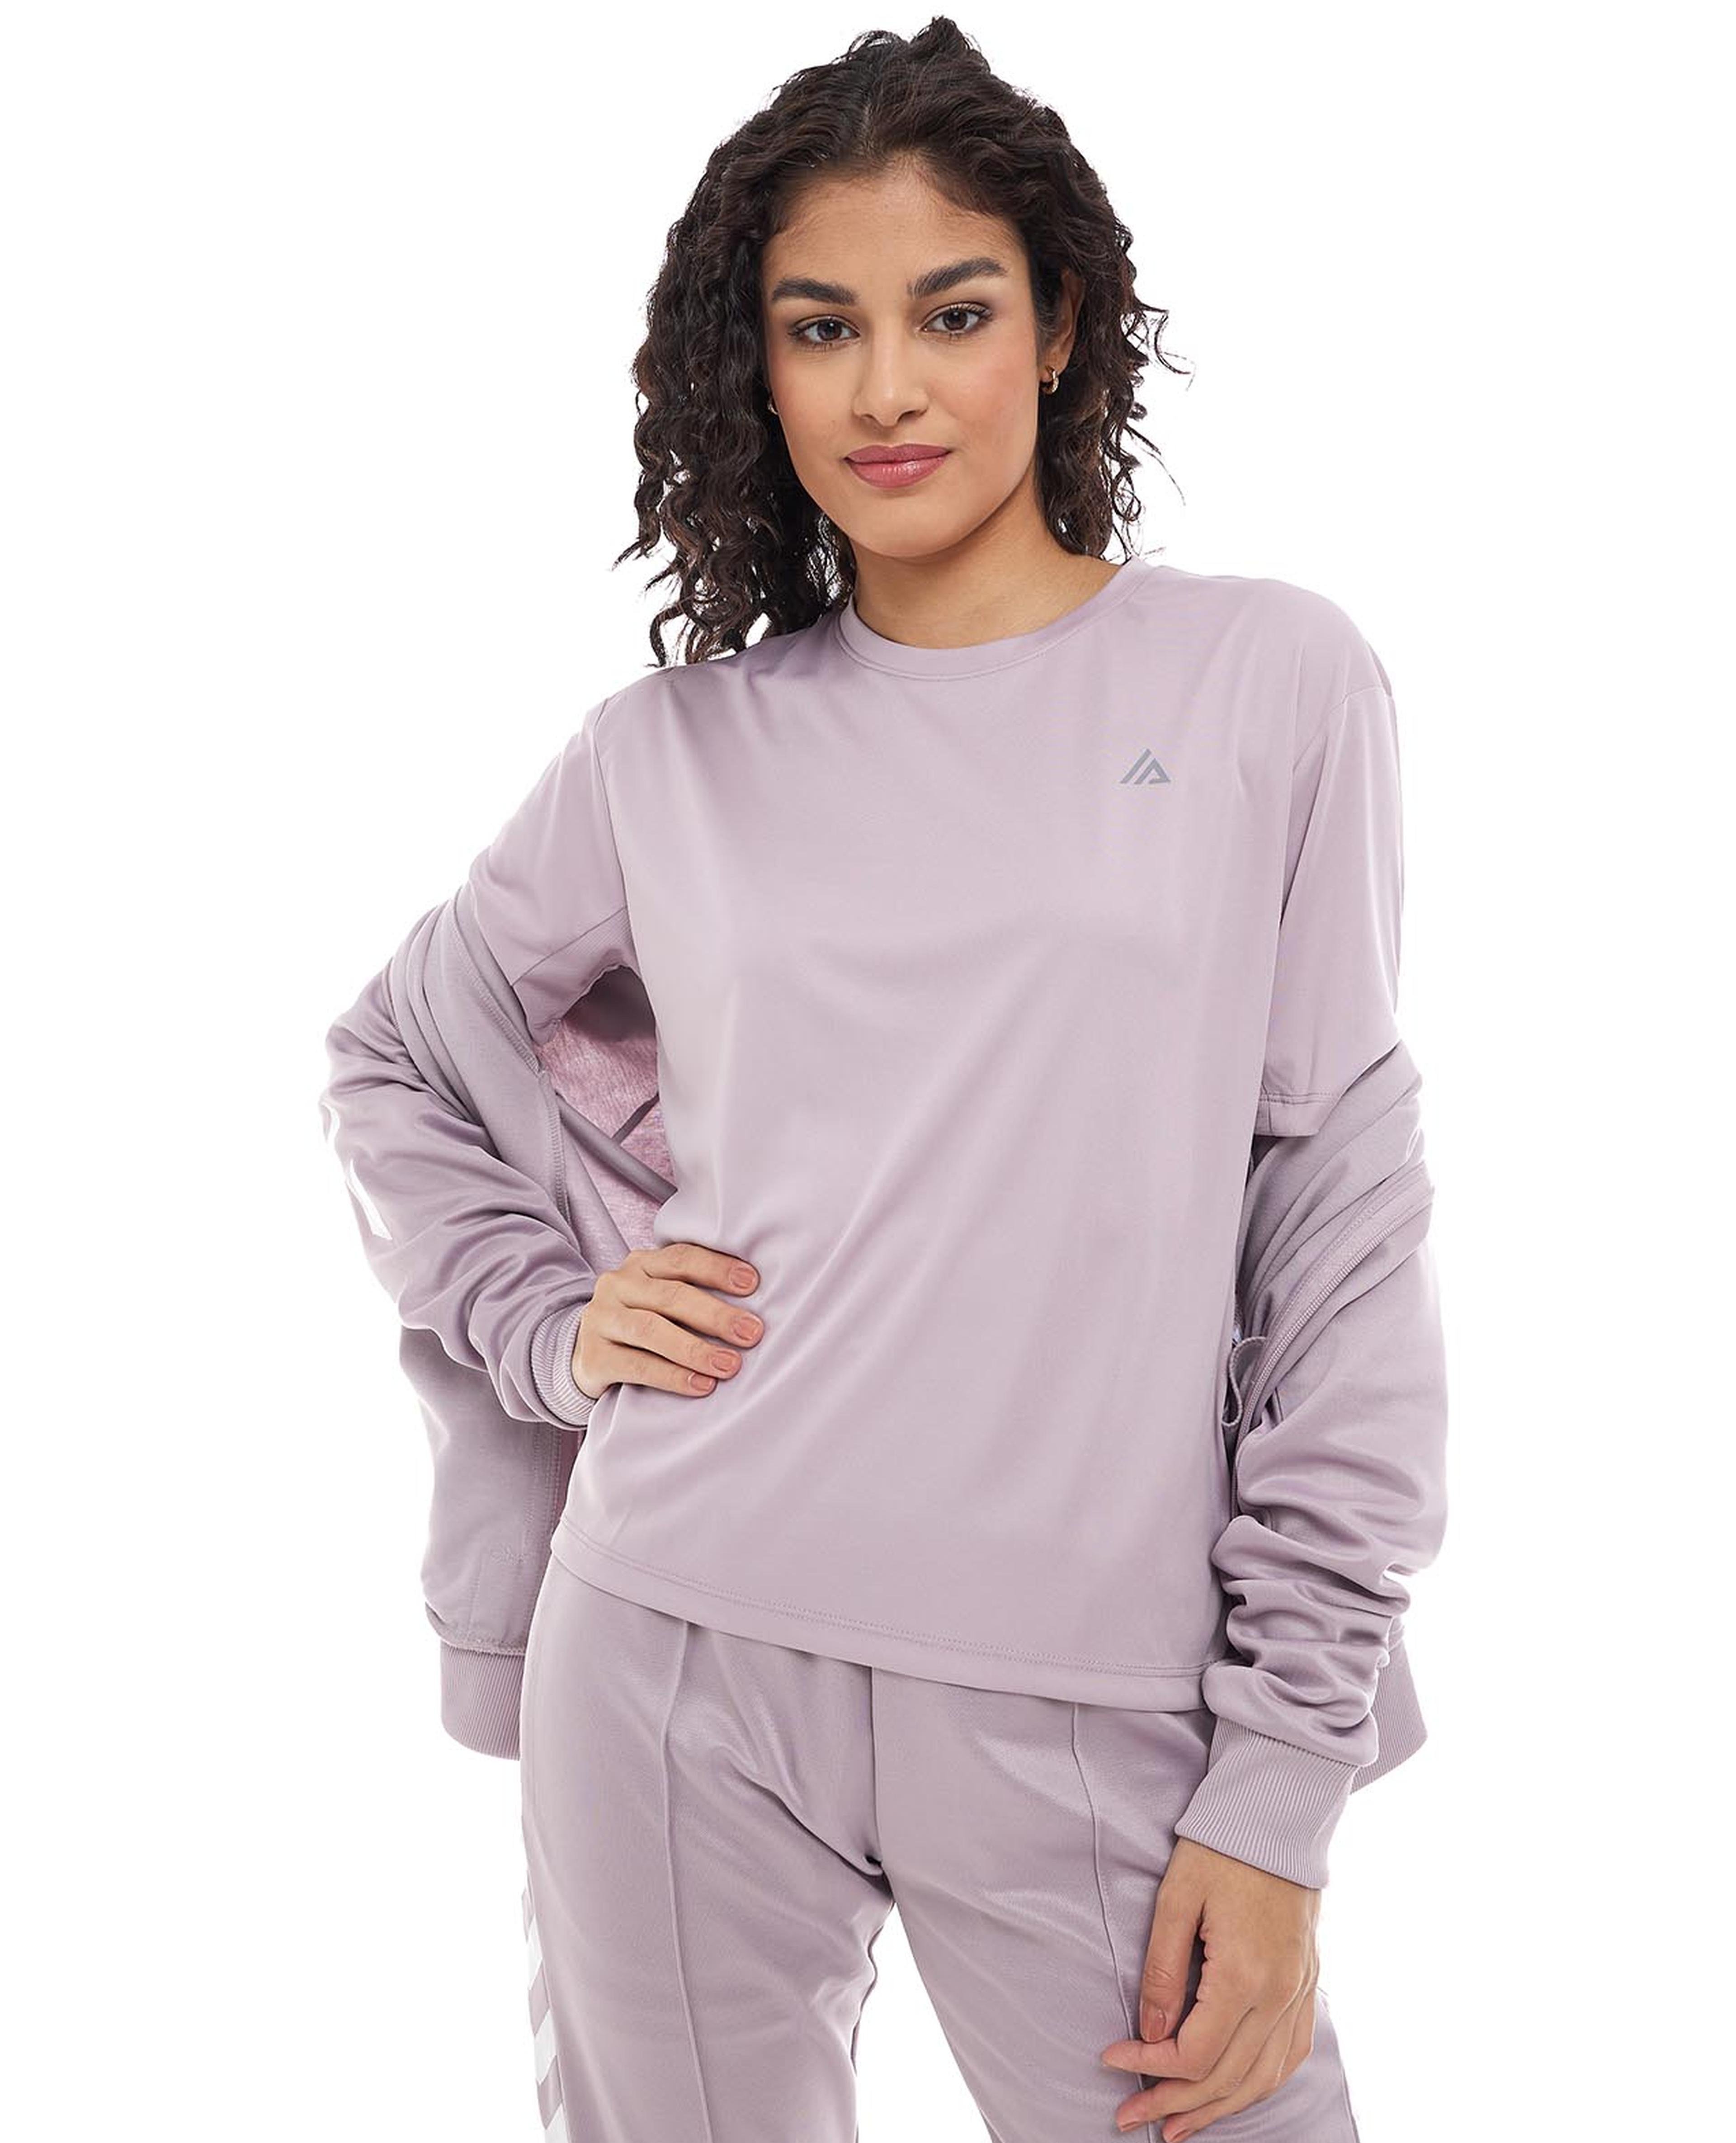 Solid Active Top with Crew Neck and Long Sleeves